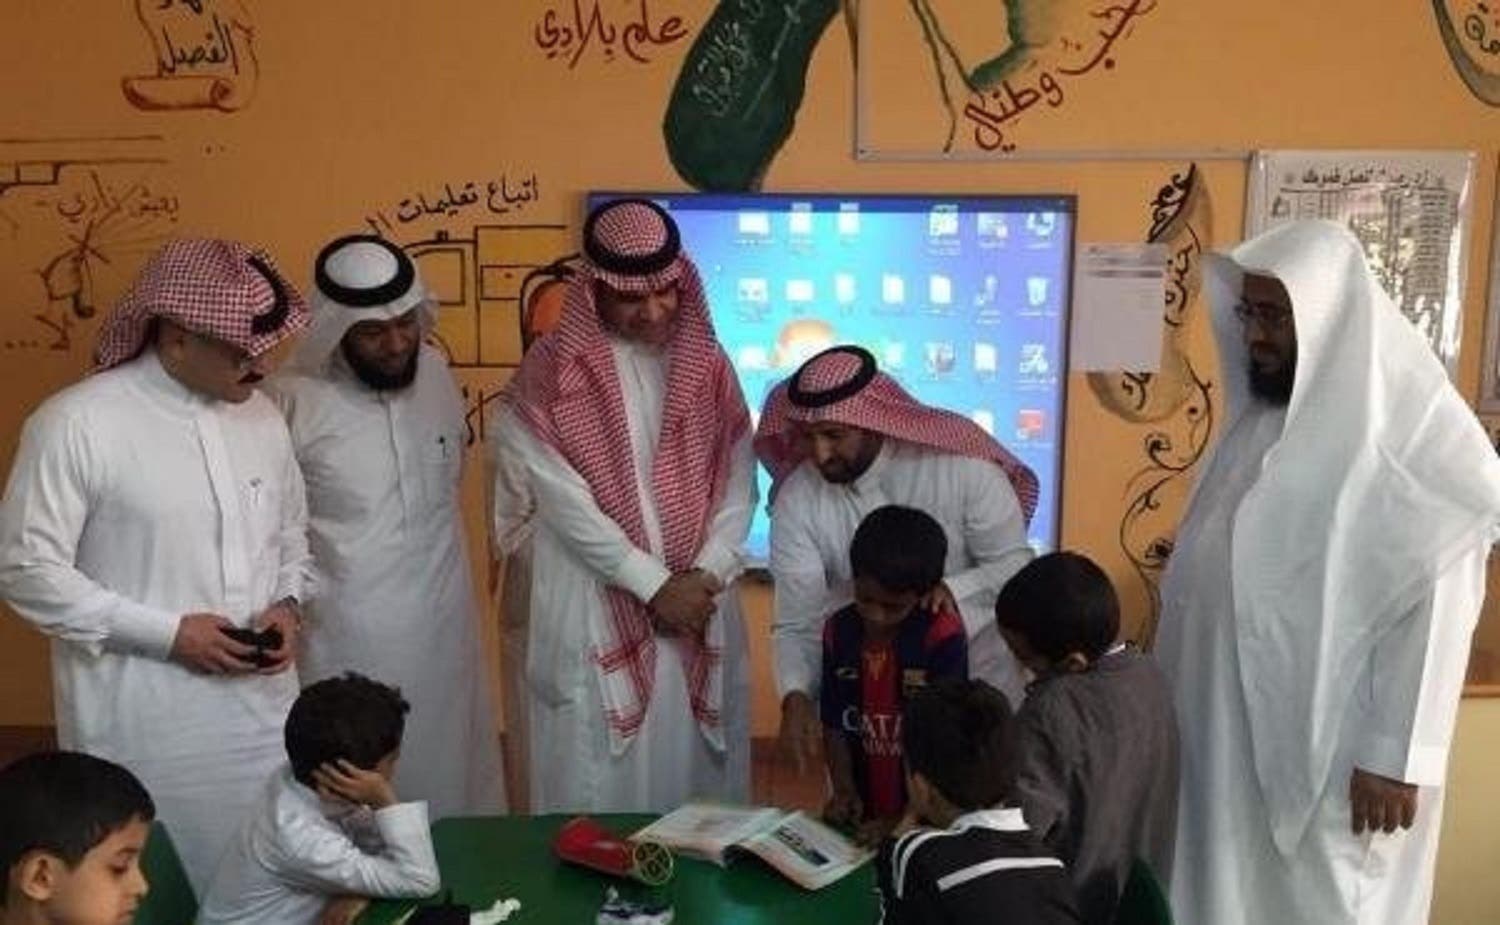 Zahrani said that the minister was aware that he teaches in this school, adding that the minister received the apology for his joke. (Supplied)